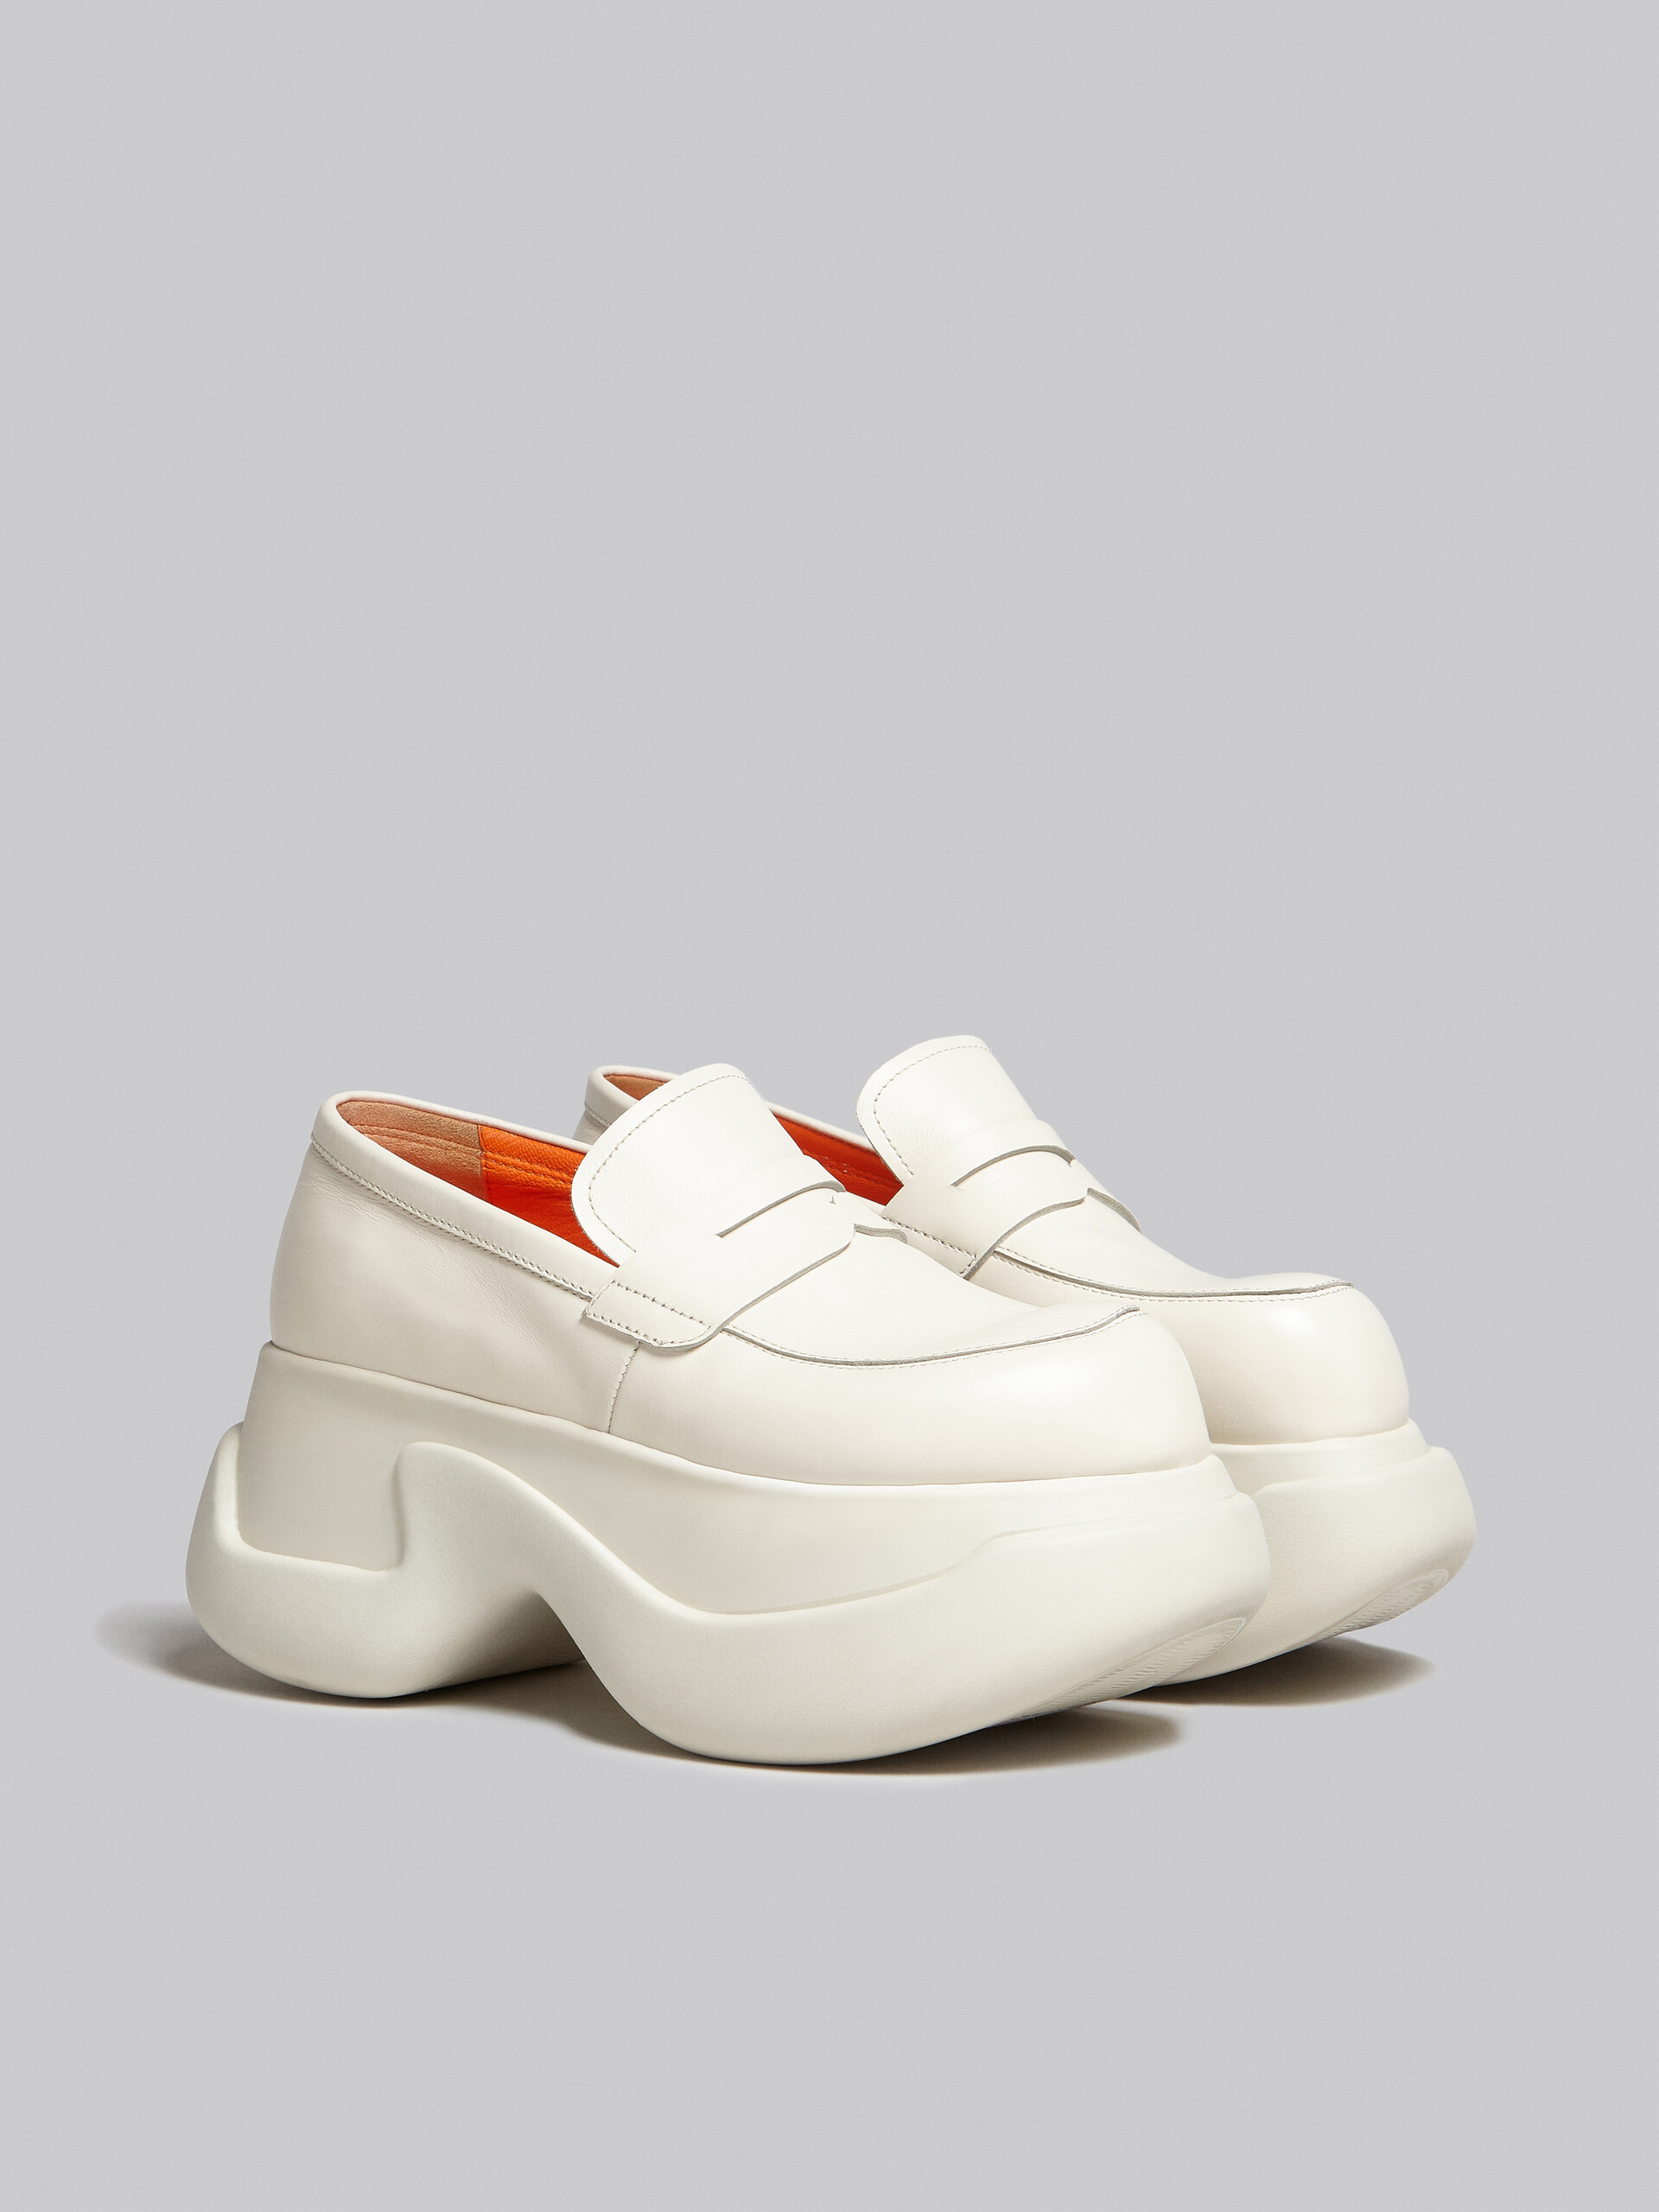 White leather Aras 23 chunky mocassin - Mocassin - Image 2